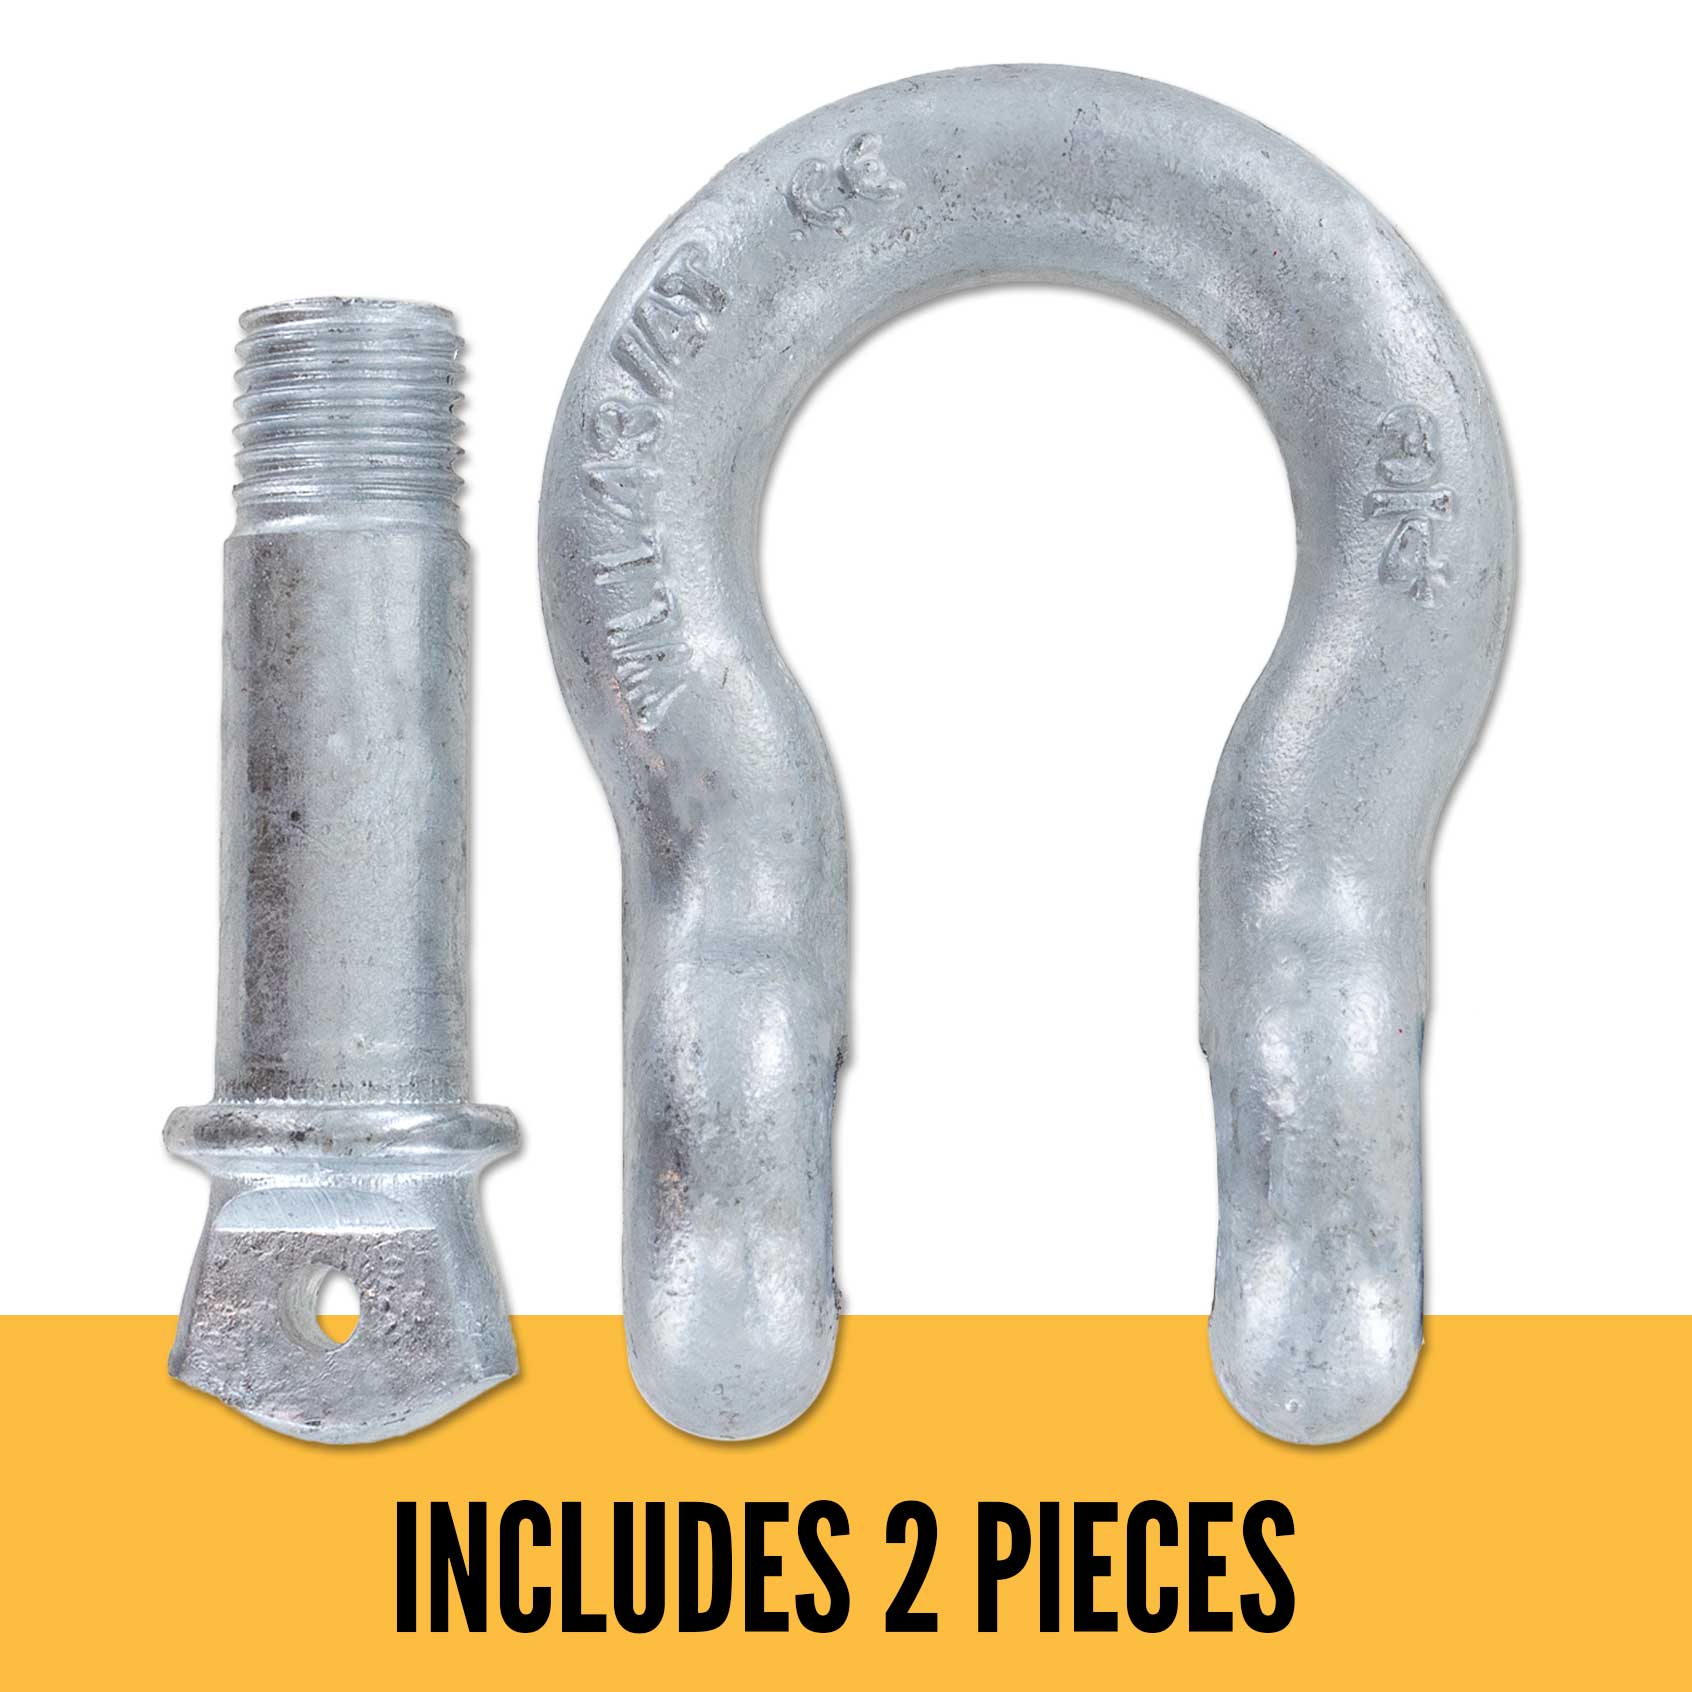 1/2" Galvanized Screw Pin Anchor Shackle - 2 Ton parts of a shackle